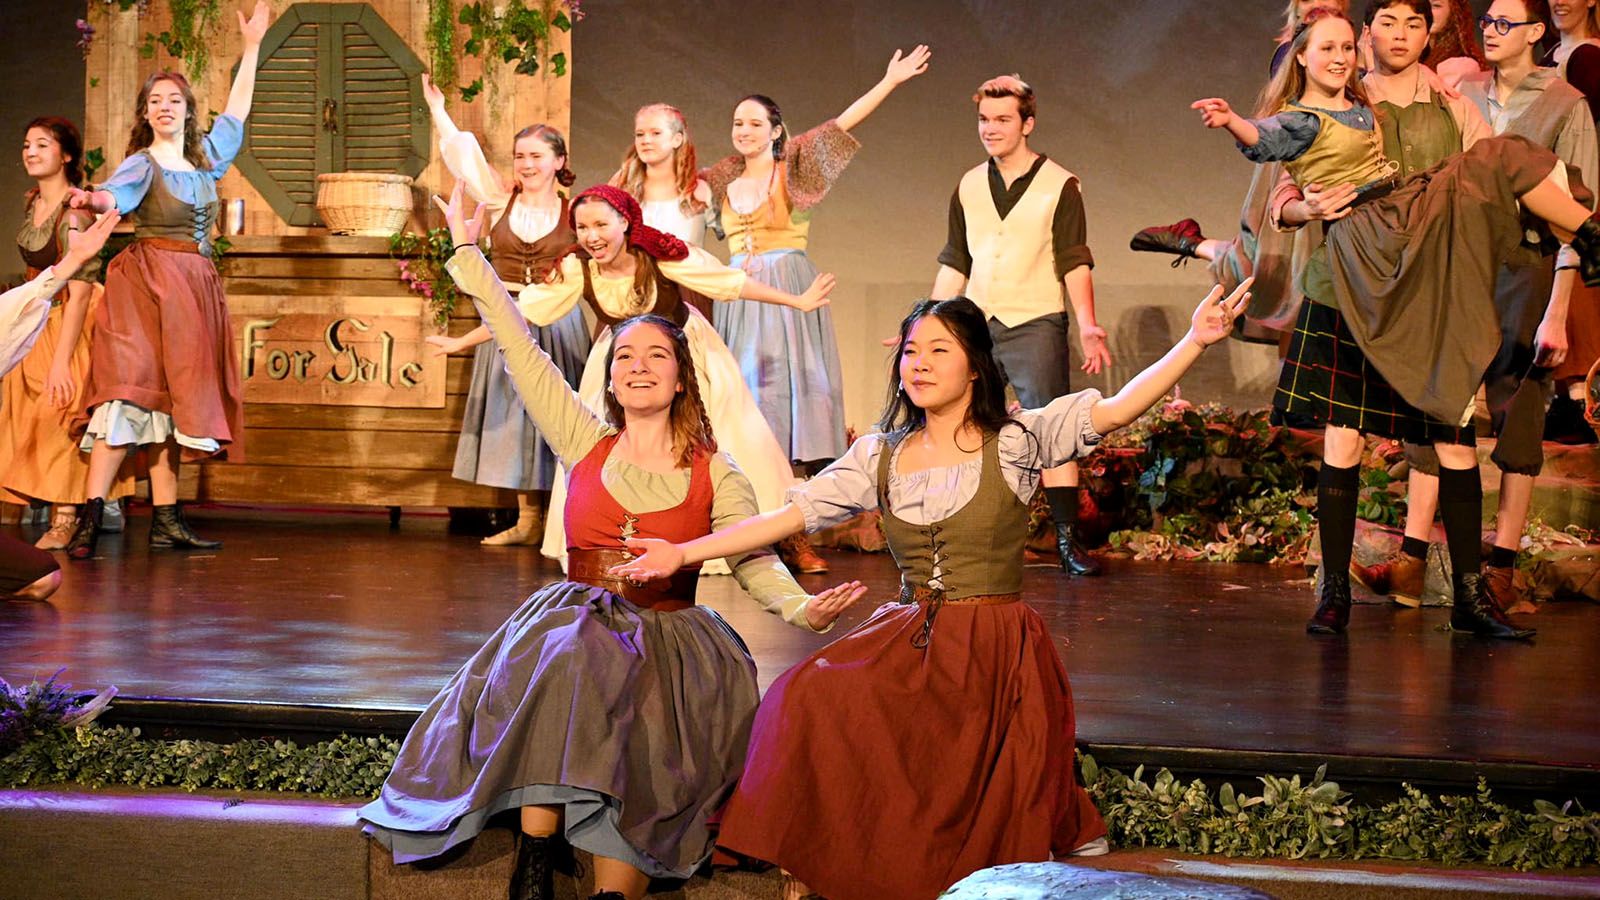 Fire & Light Productions moved "Brigadoon" to May 19-20 at USF Performing Arts Center.